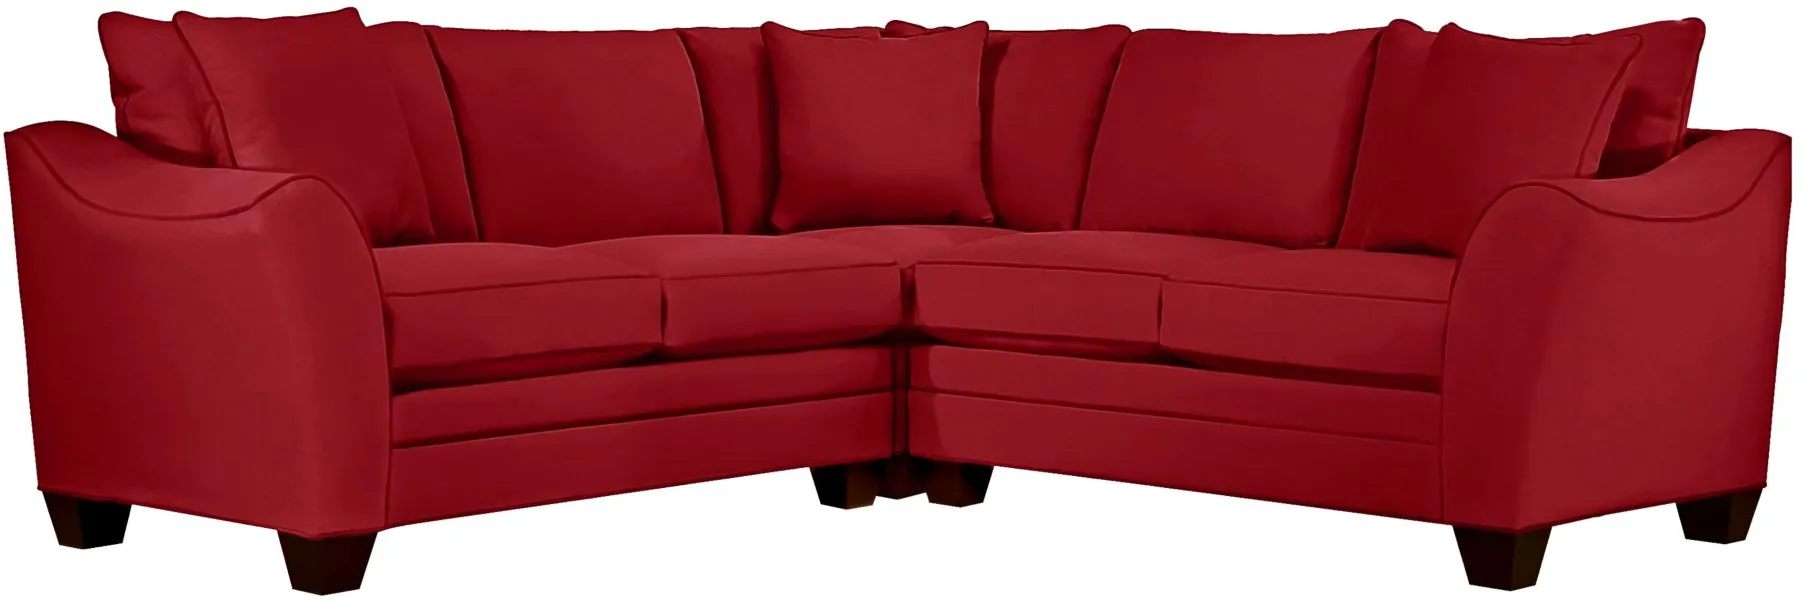 Foresthill 3-pc. Symmetrical Loveseat Sectional Sofa in Suede So Soft Cardinal by H.M. Richards